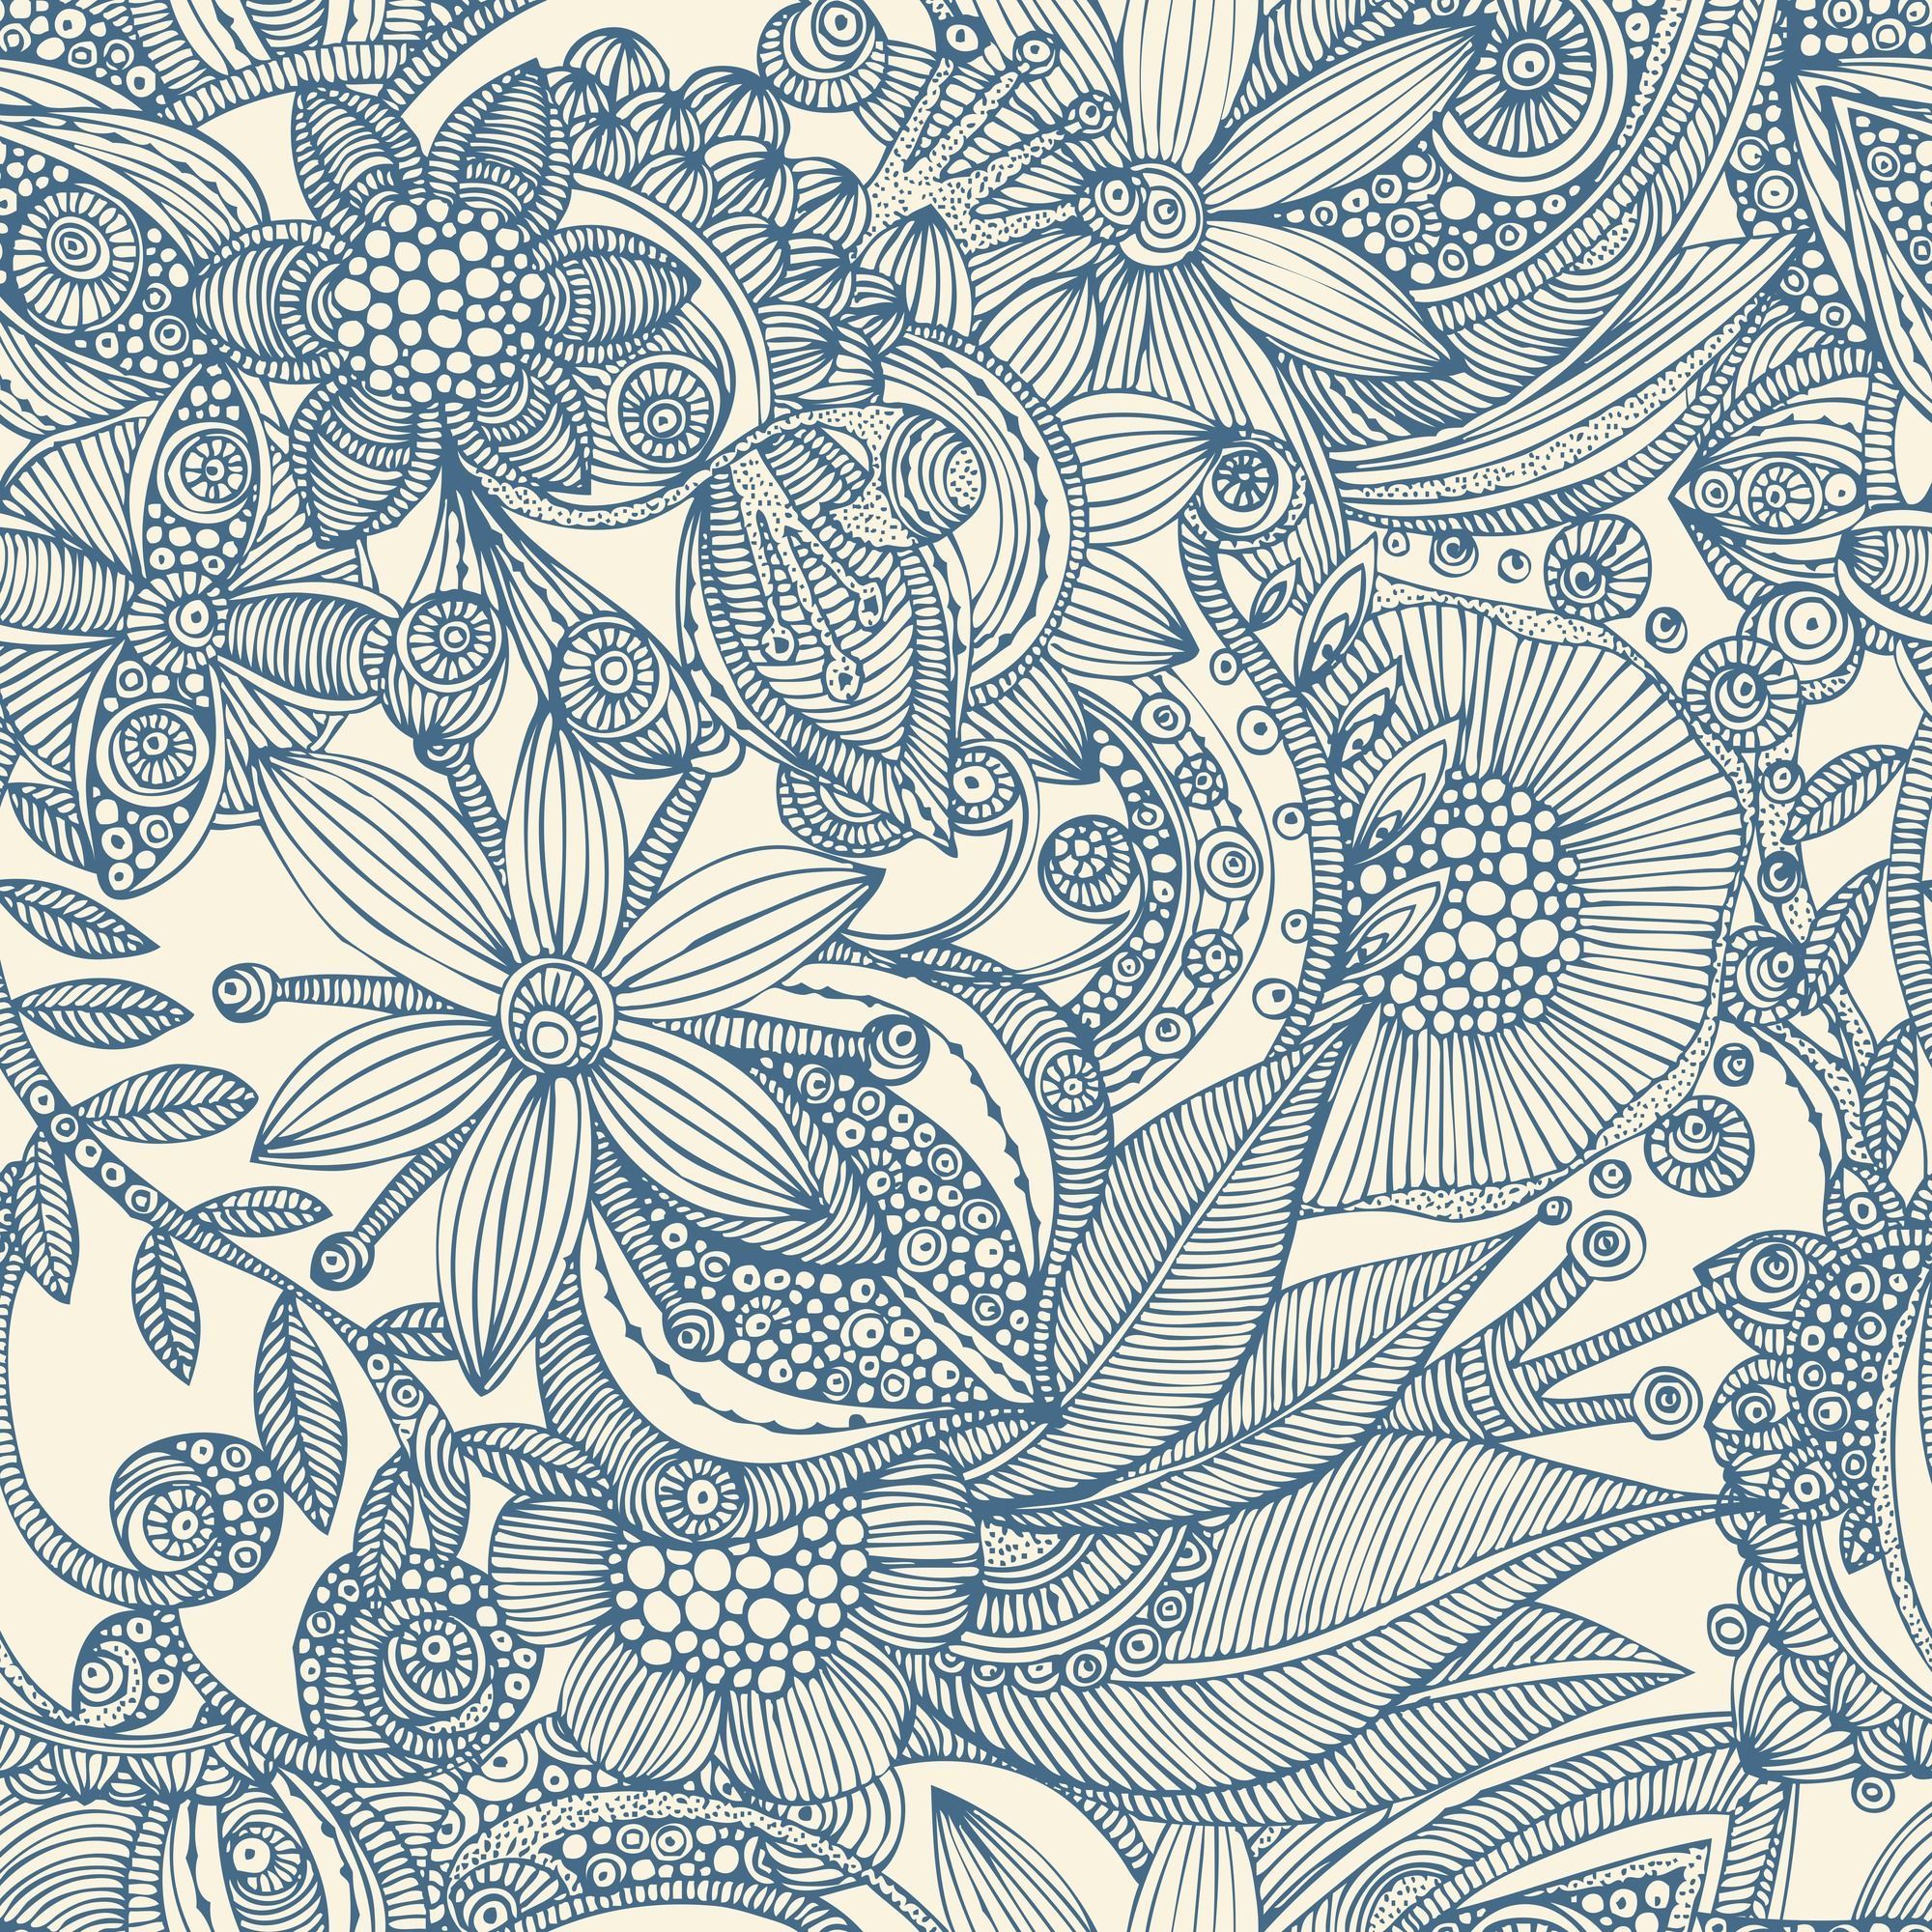 Flowers and Doodles Blue. Wall murals, Doodle wall, Mural wall art